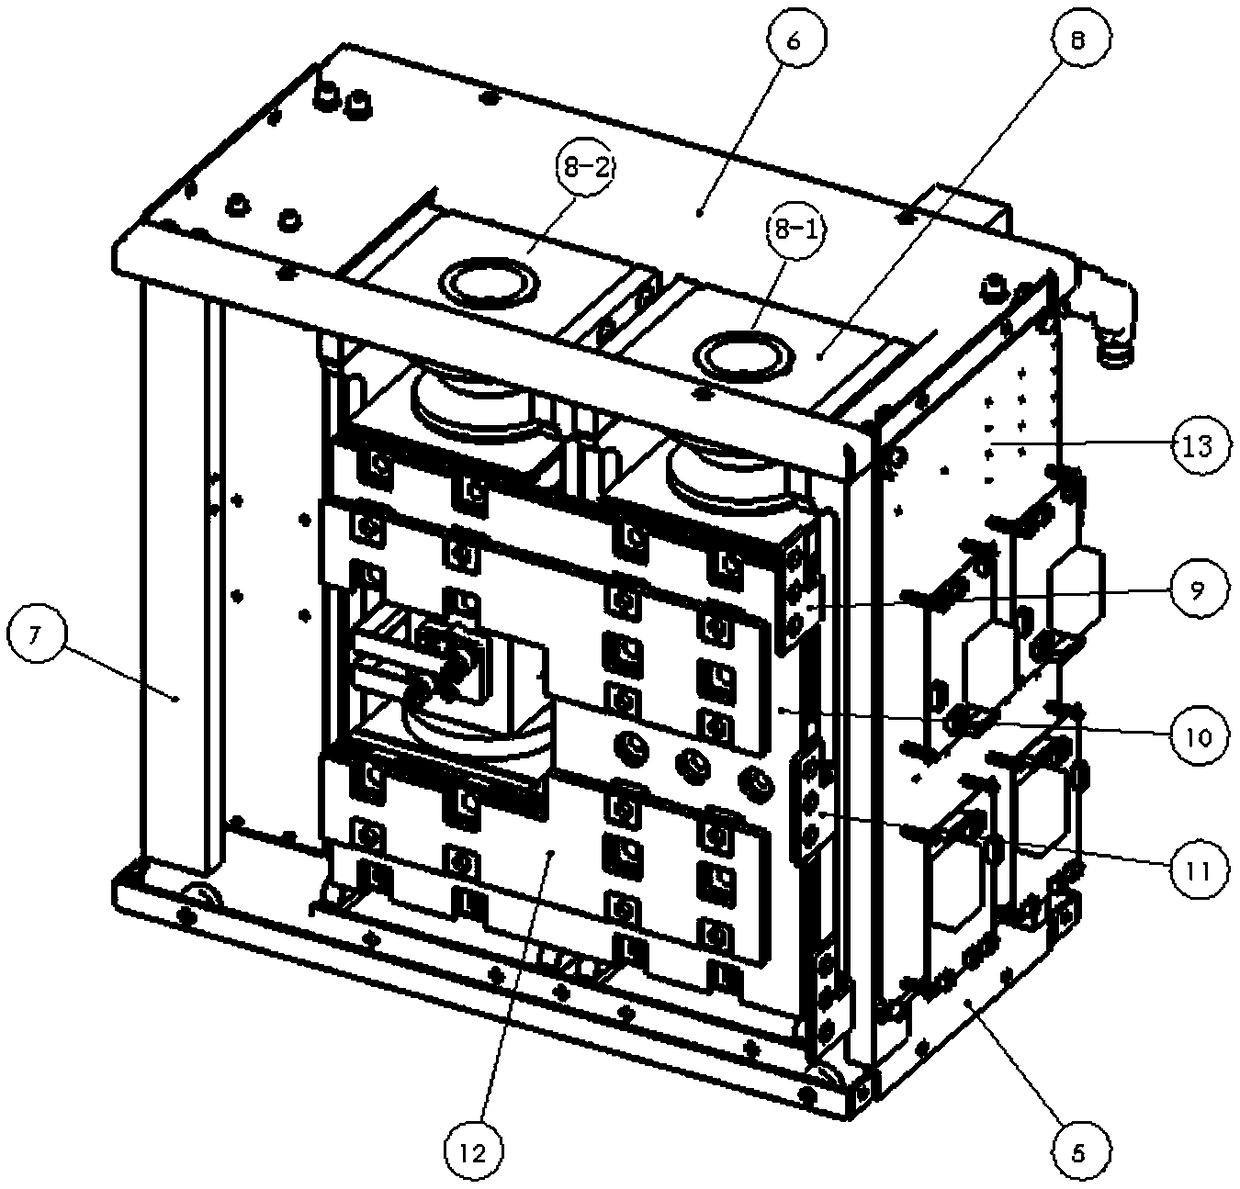 A power unit module of a frequency converter with an open frame structure